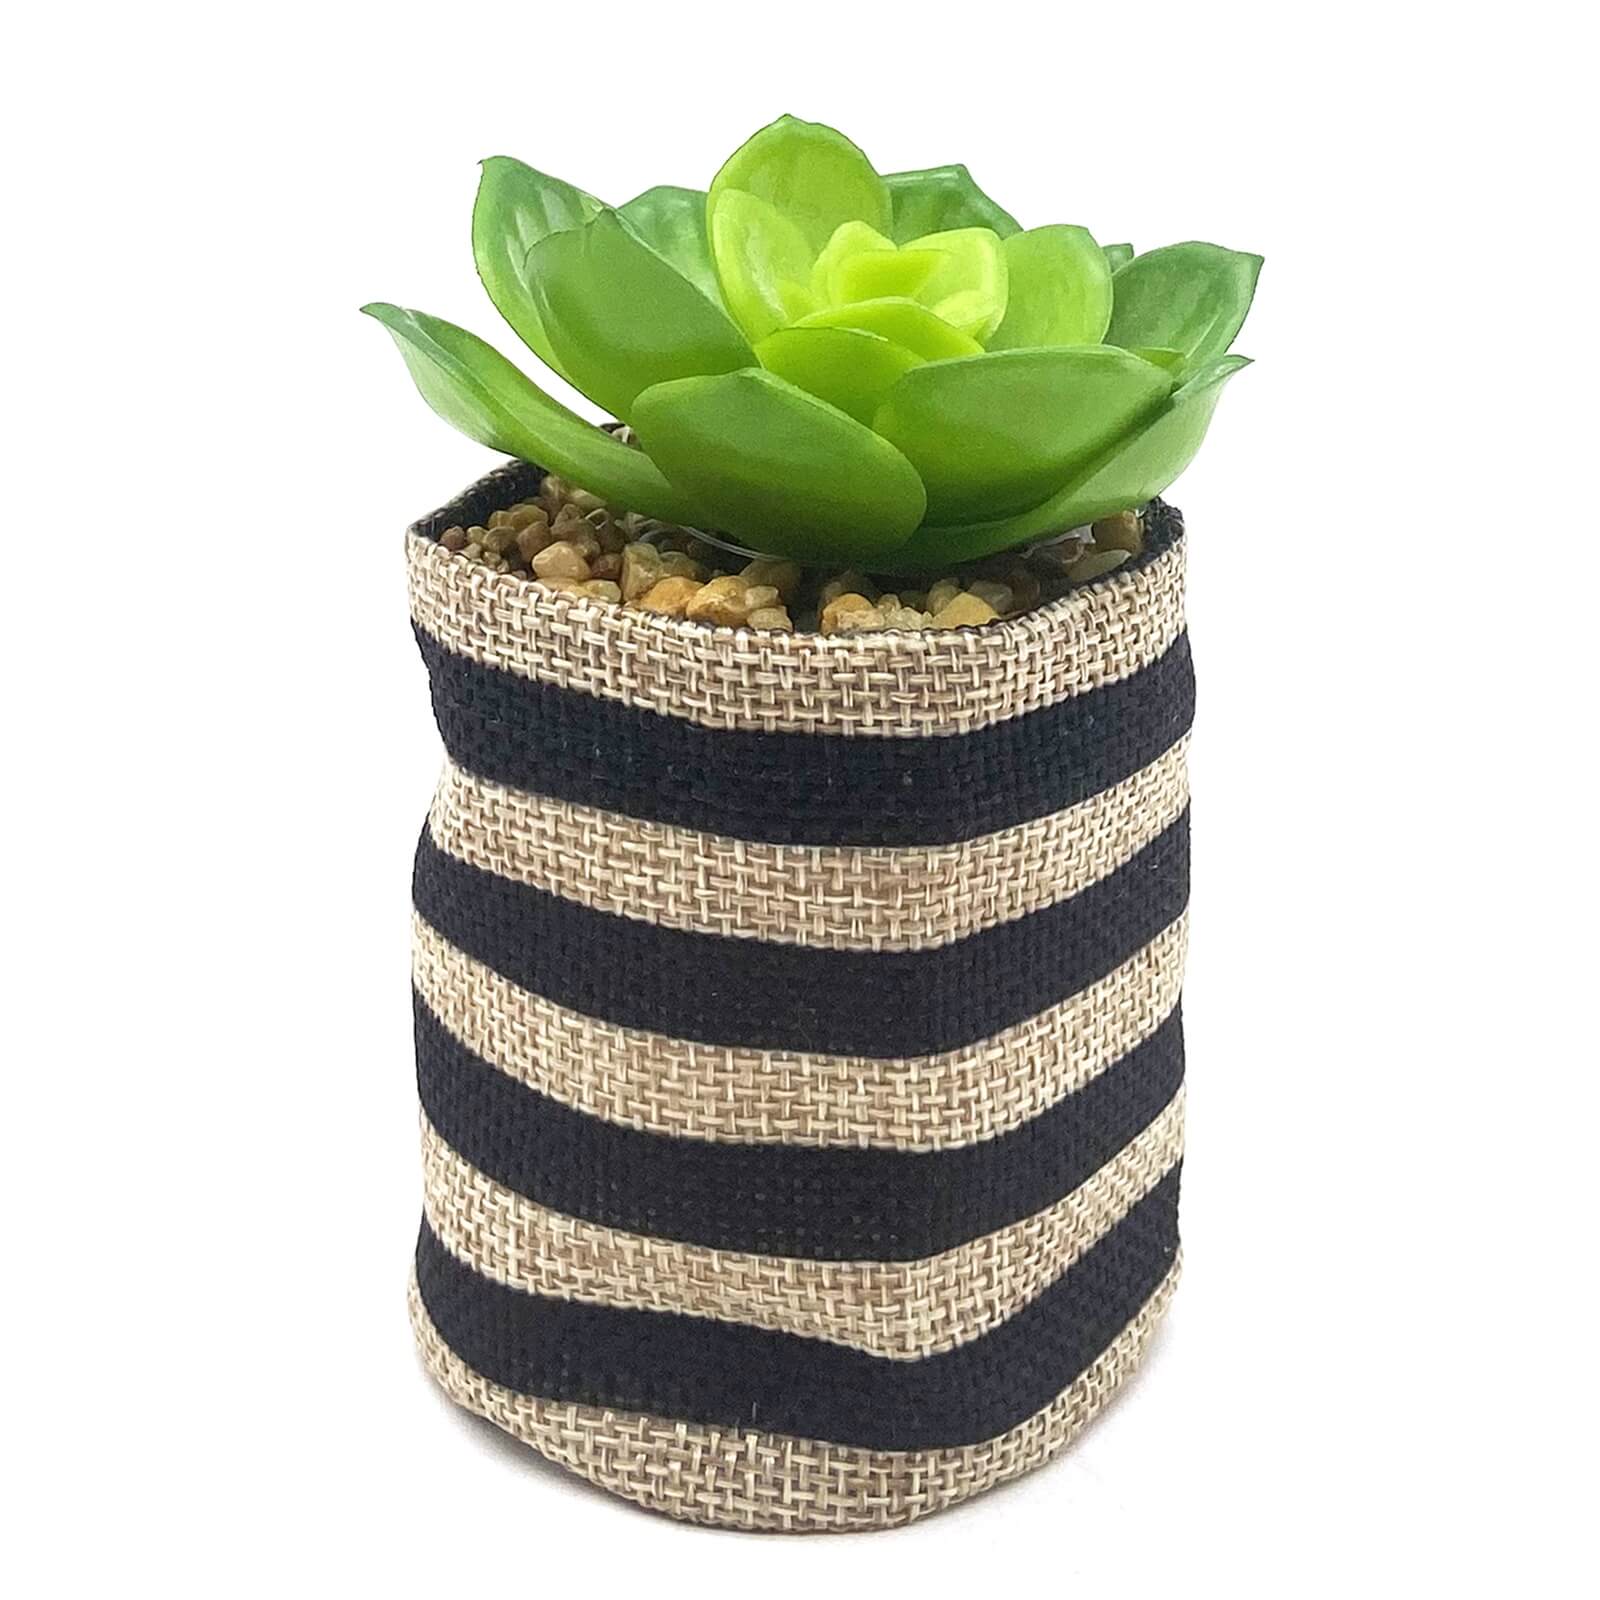 Small Plant in Striped Sack - Black & Natural